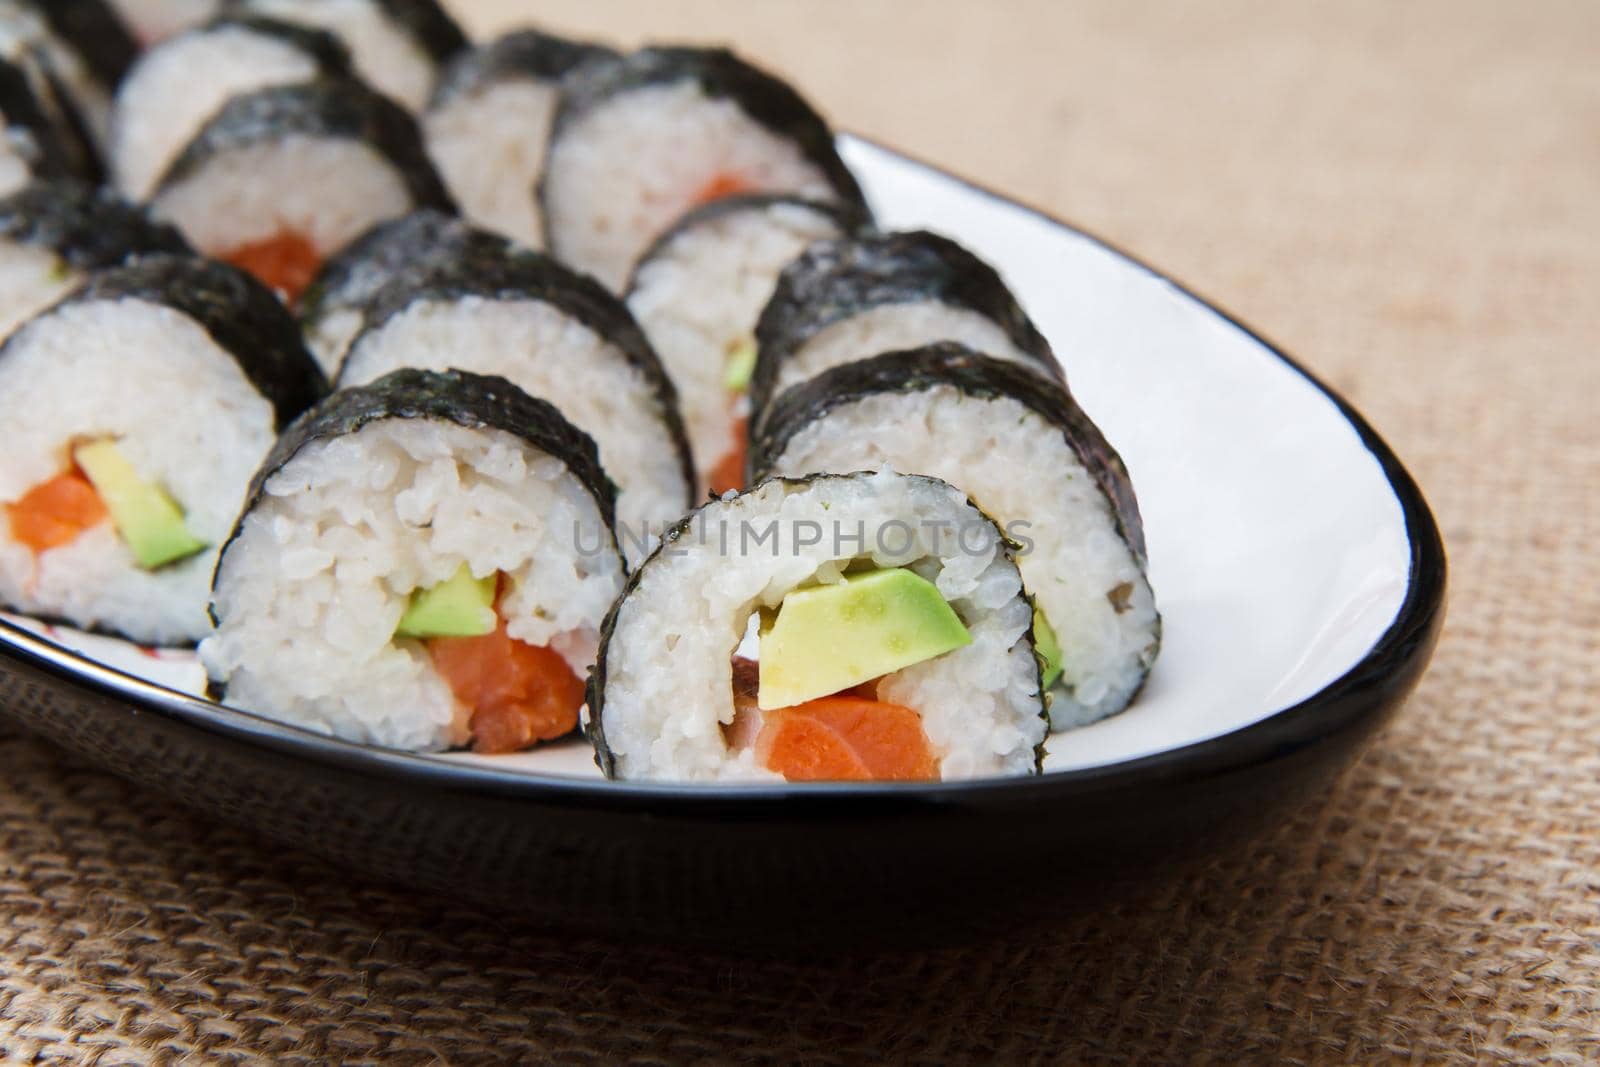 Sushi rolls in nori seaweed sheets with avocado and red fish on ceramic plate on sackcloth